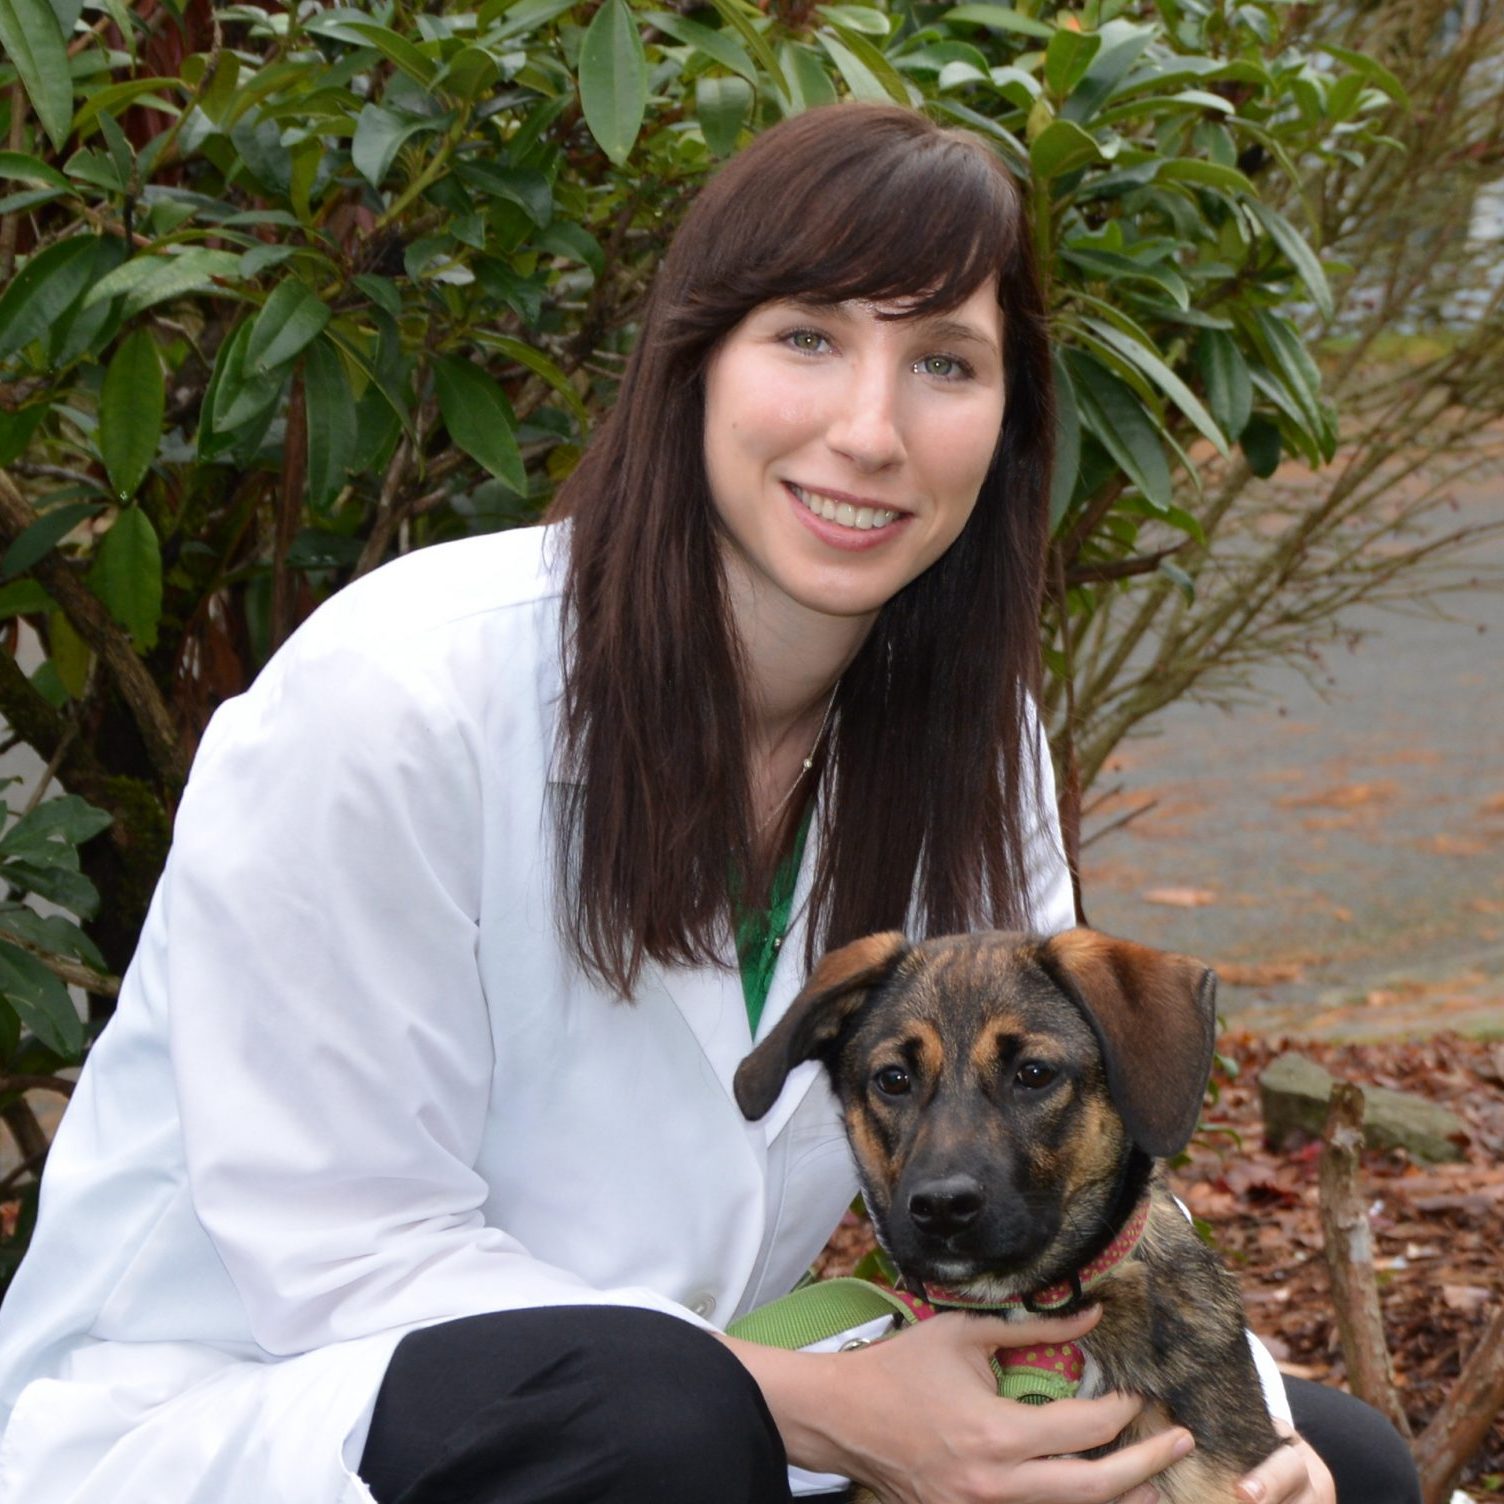 Dr Liza Cahn is a pet writer and qualified US-based vet who writes for The Veterinary Content Company